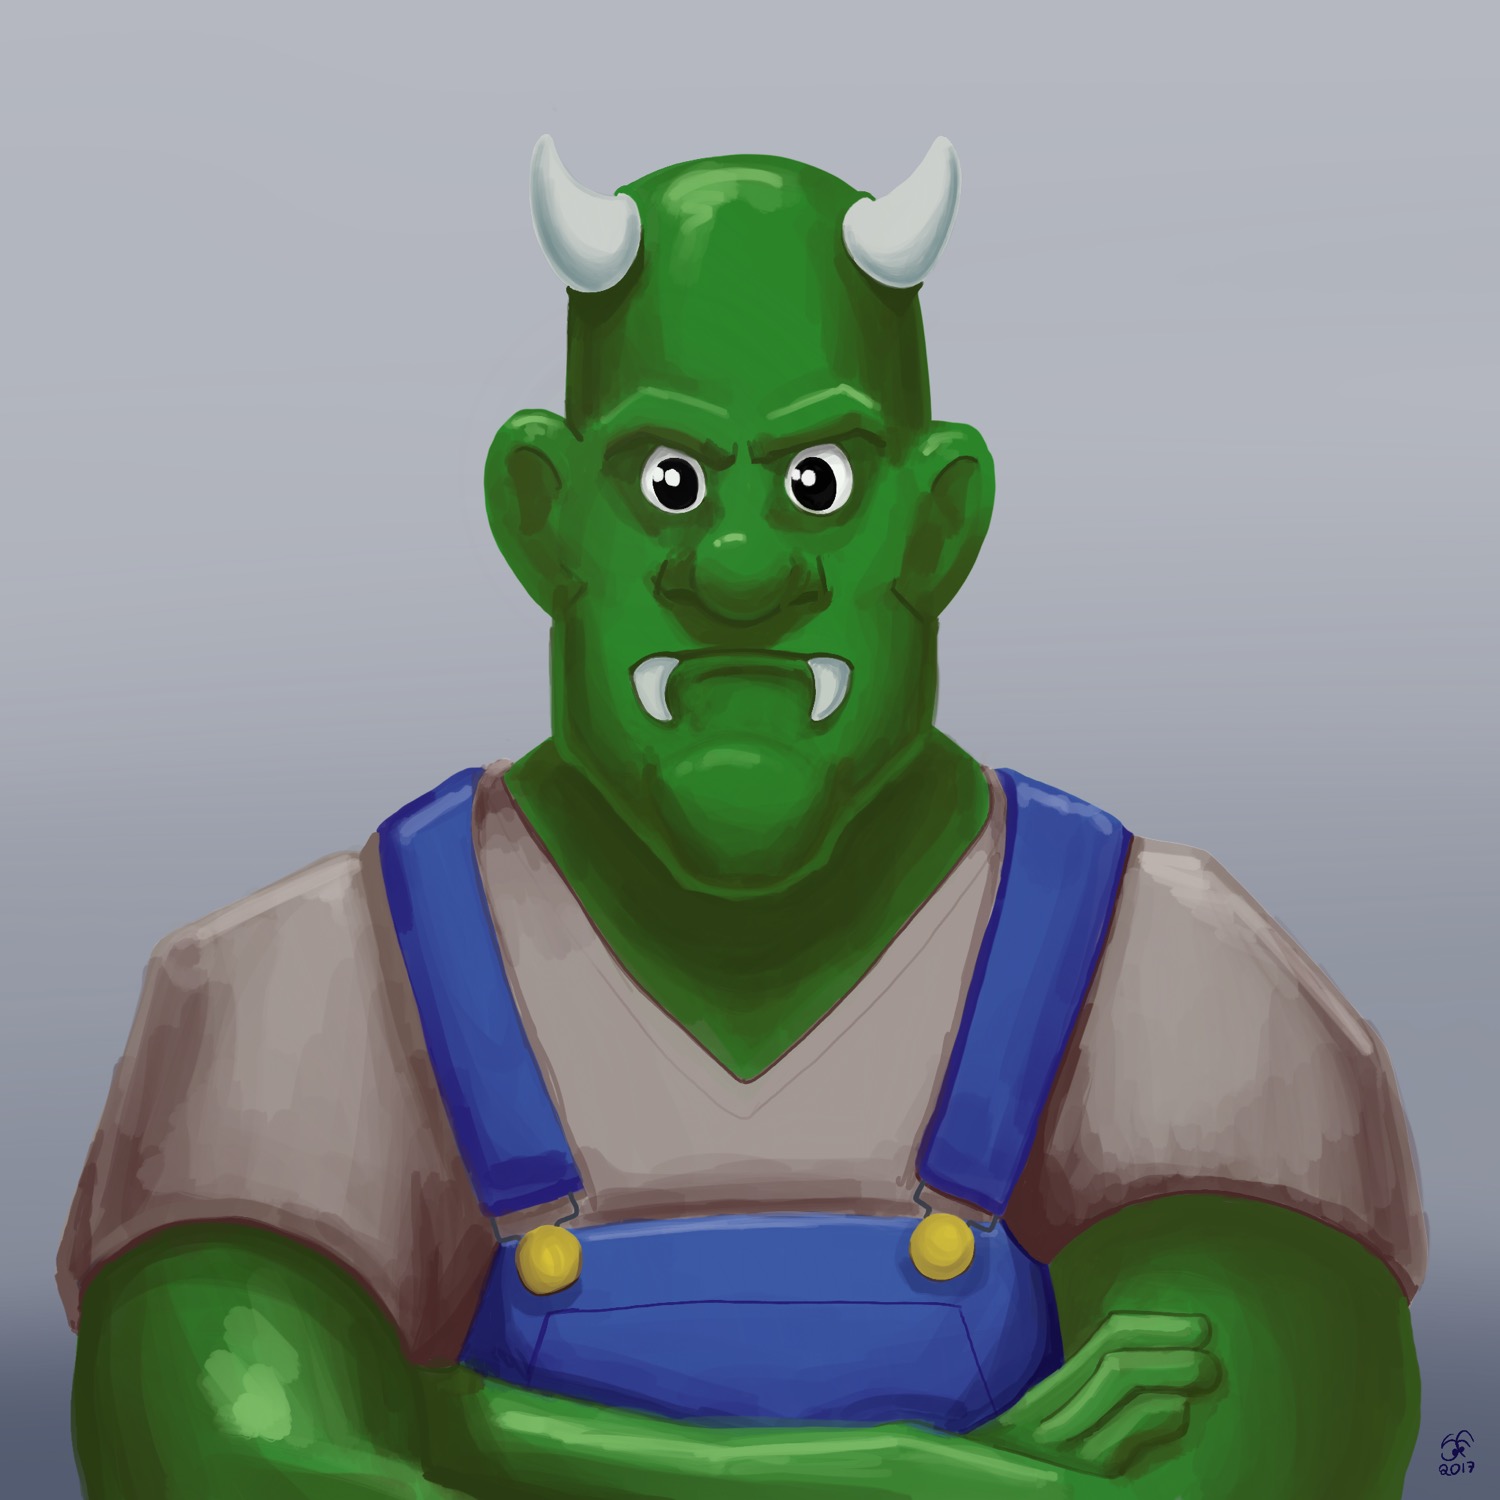 A painterly illustration of a green monster in overalls.